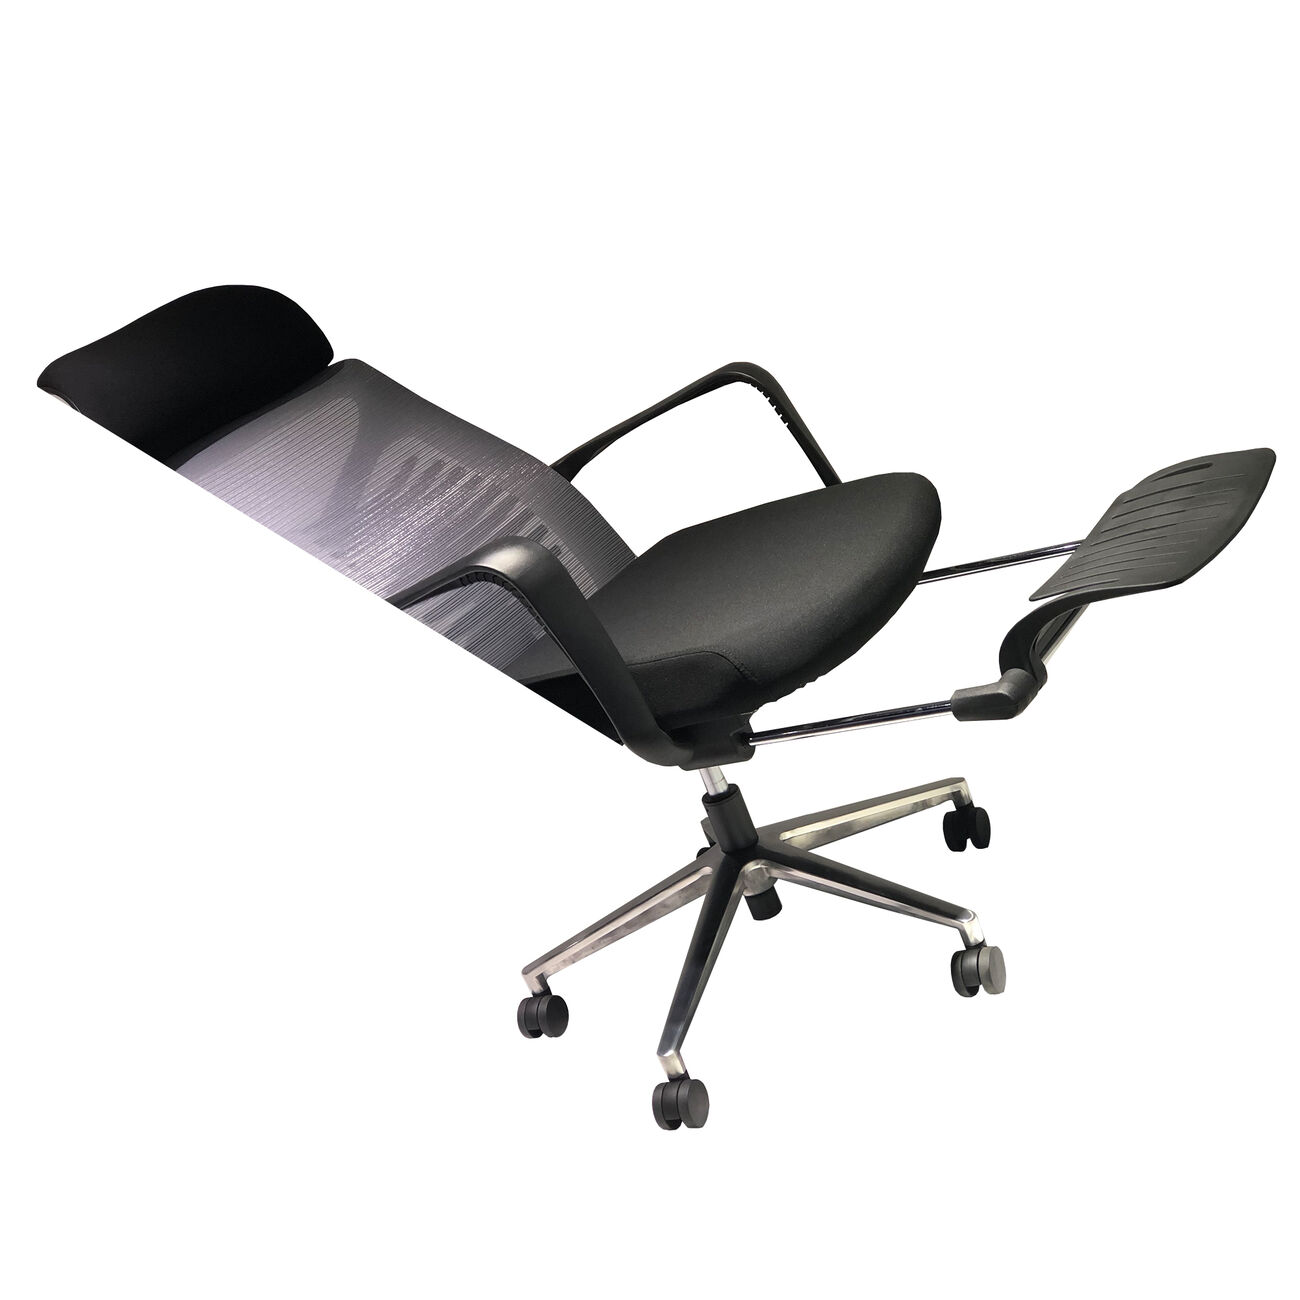 Mesh Back Padded Adjustable Ergonomic Office Chair with Headrest and Retractable Footrest, Black